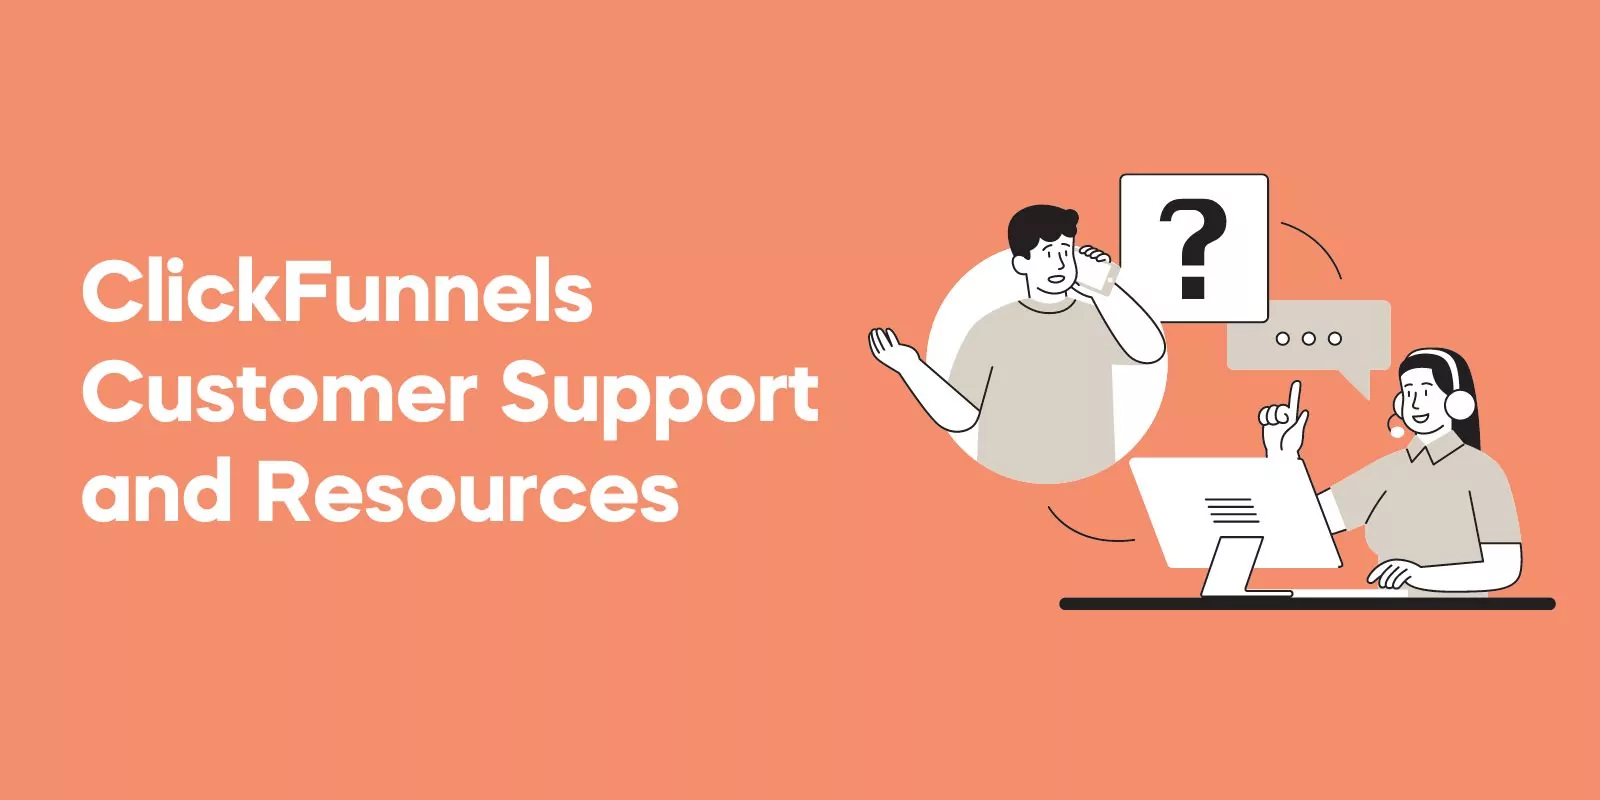 ClickFunnels Customer Support and Resources